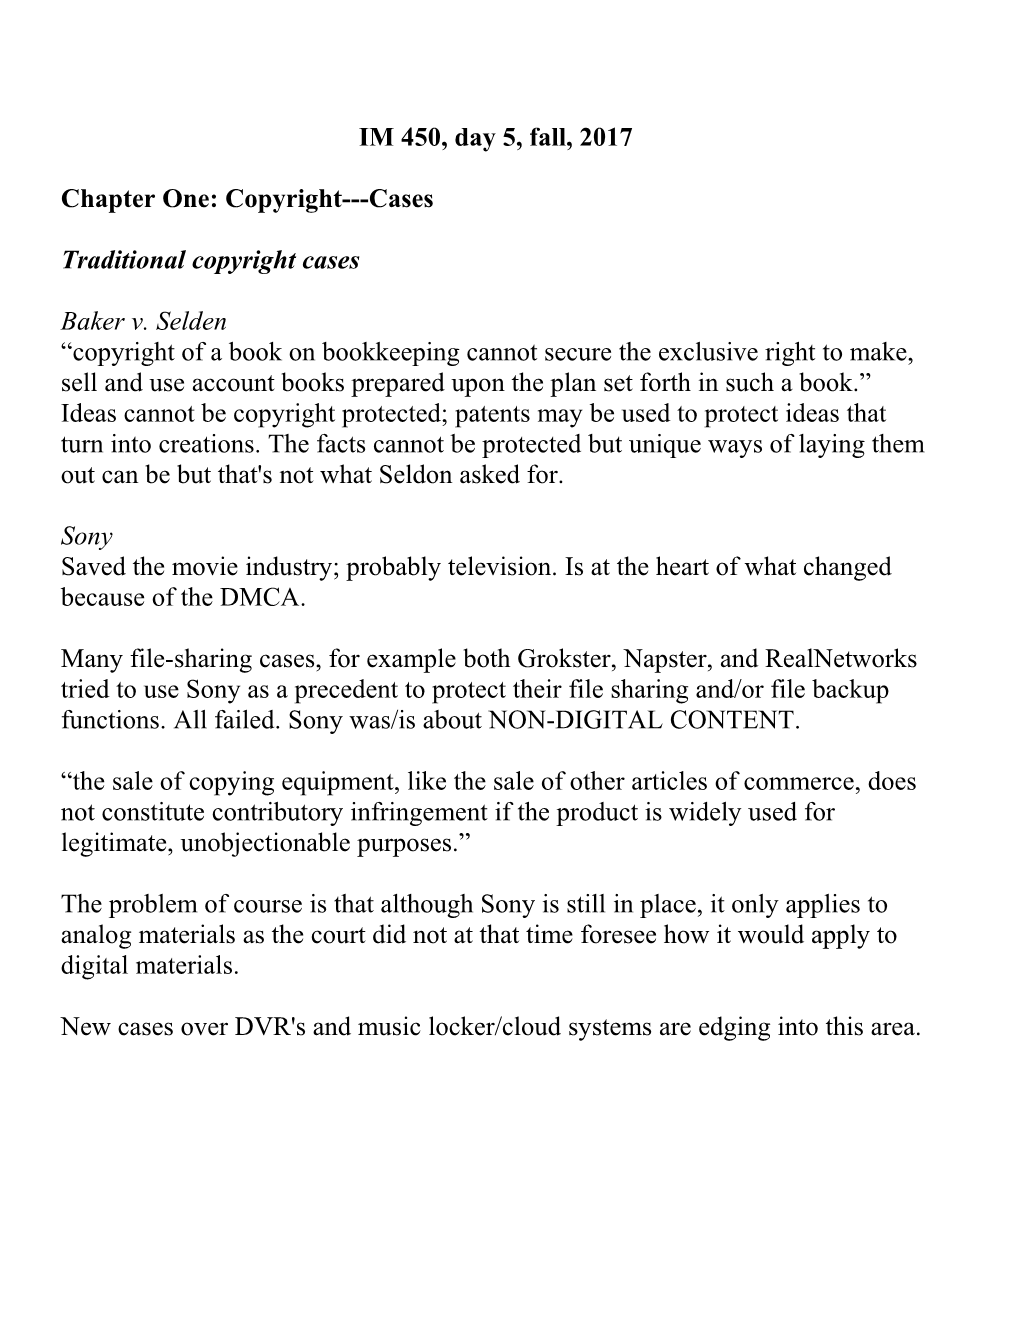 Chapter One: Copyright Cases